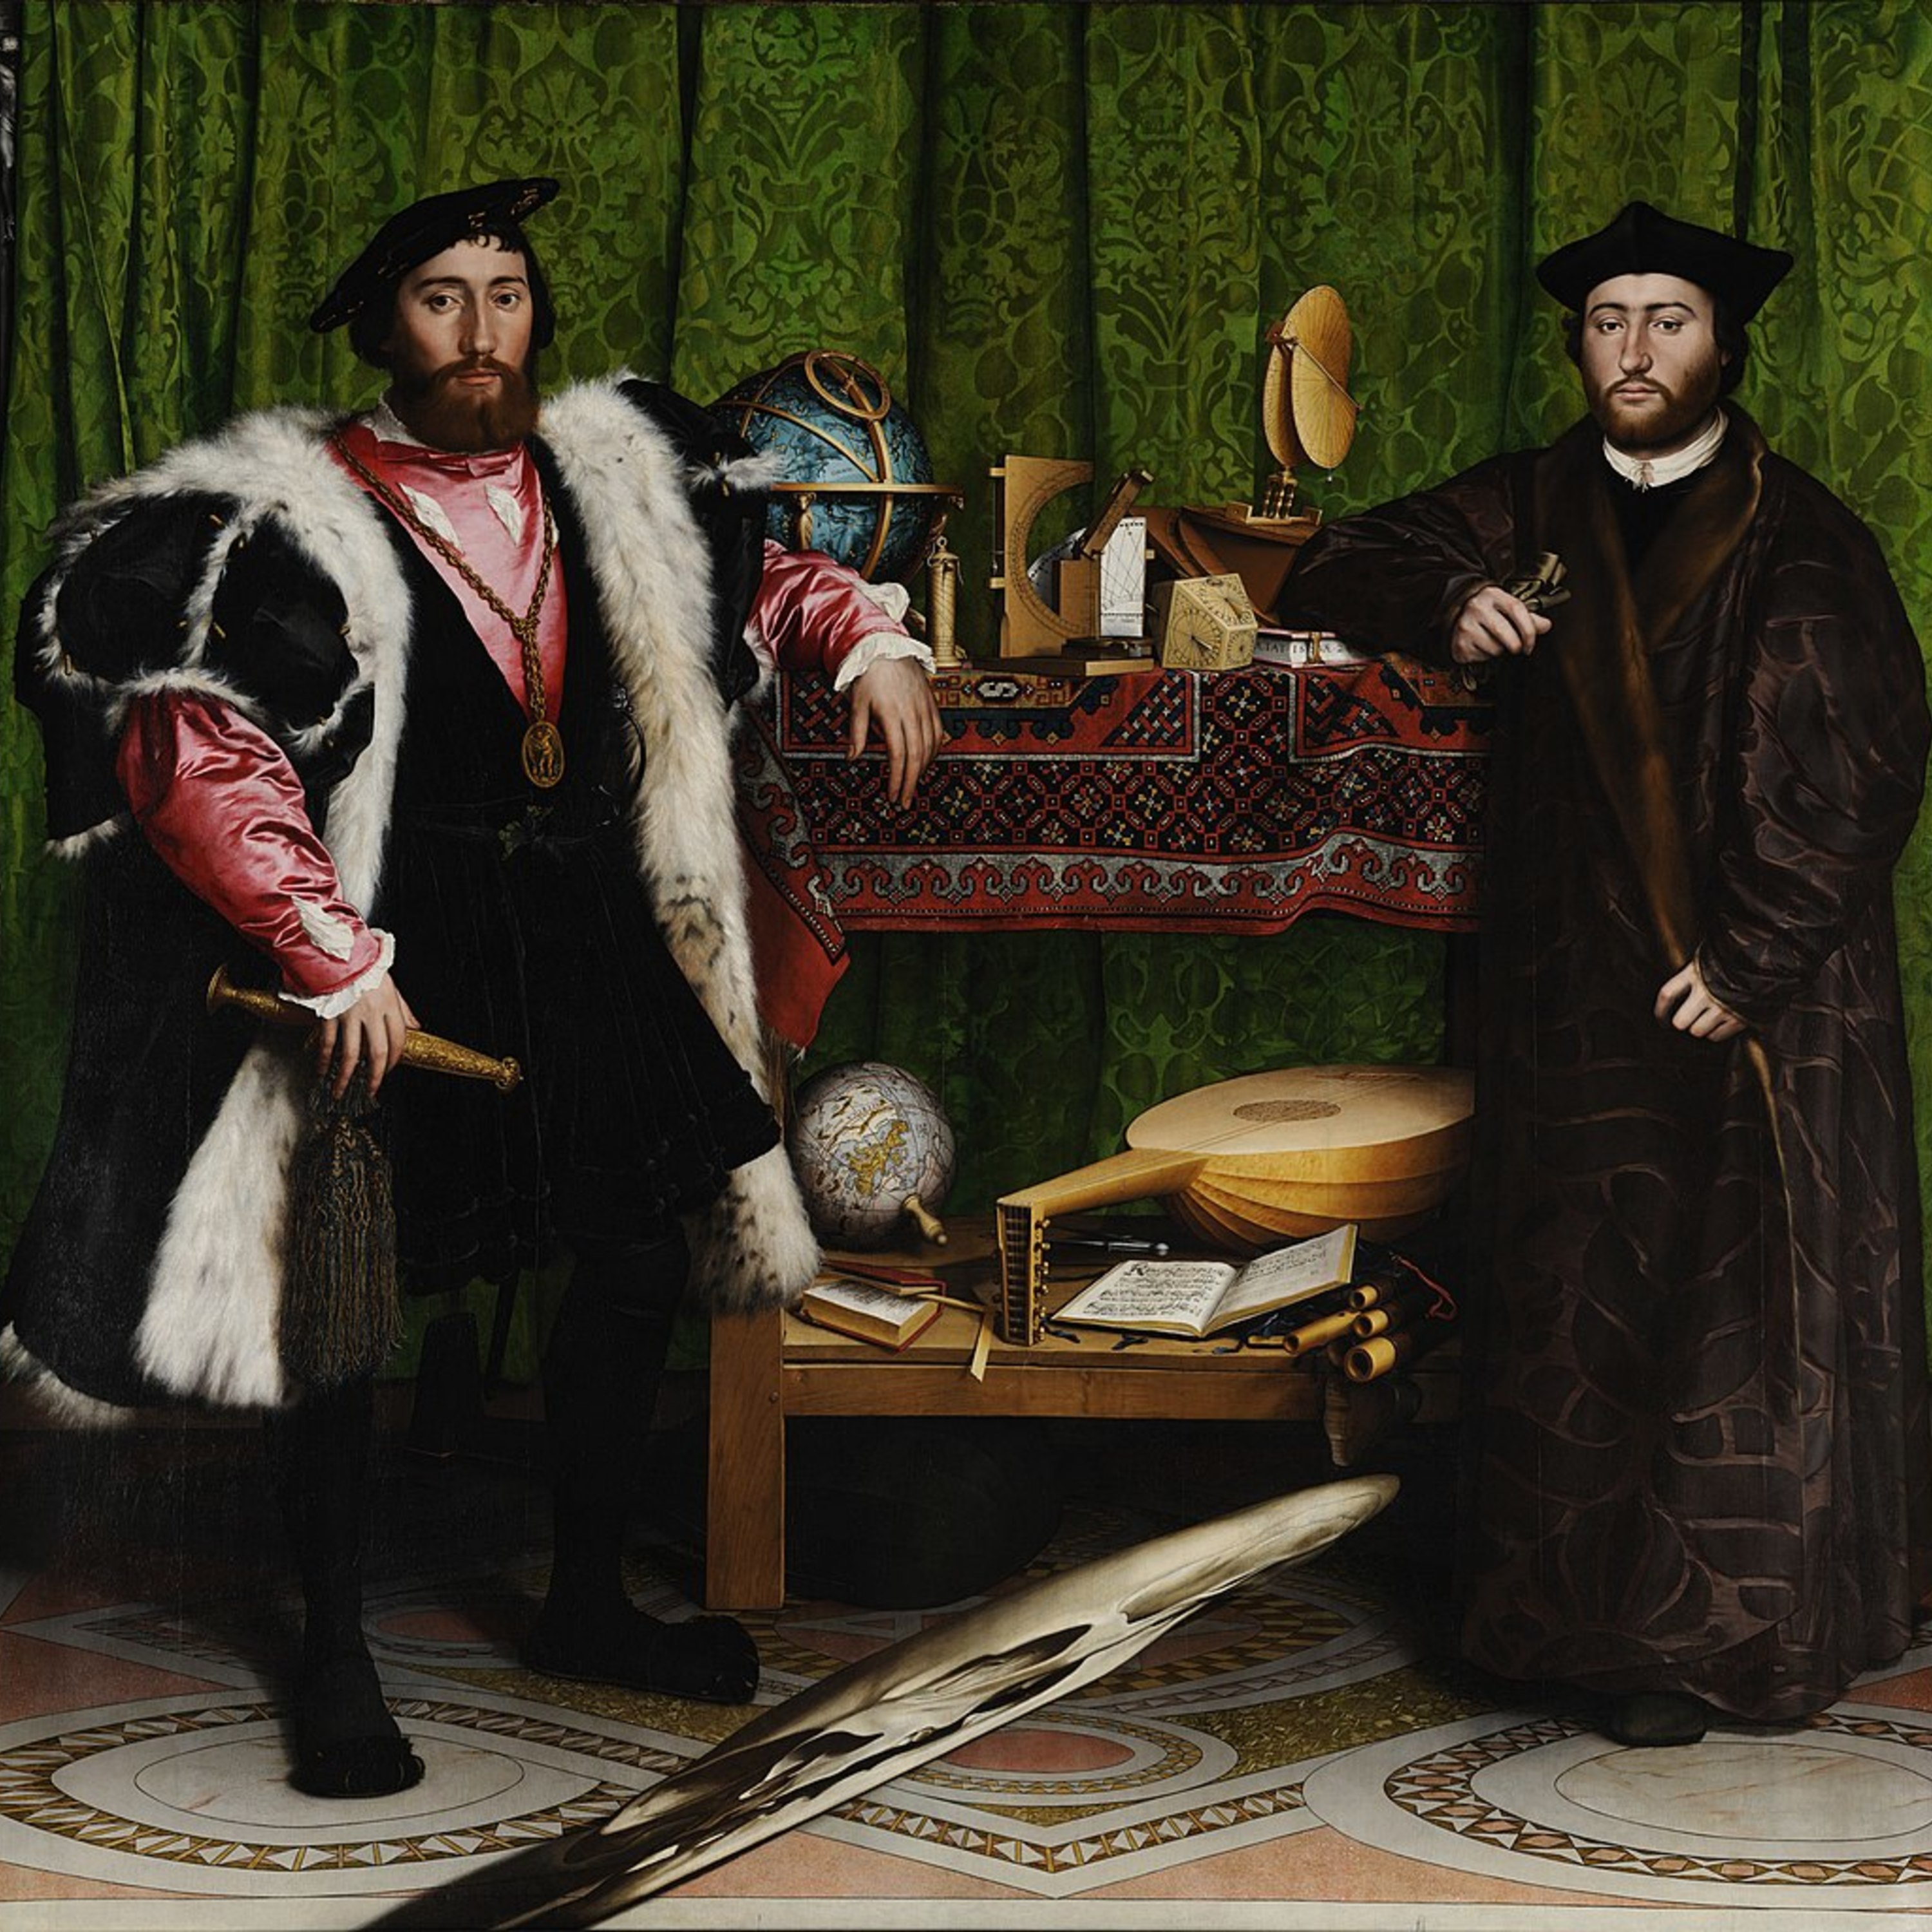 1039px-Hans_Holbein_the_Younger_-_The_Ambassadors_-_Google_Art_Project.jpg